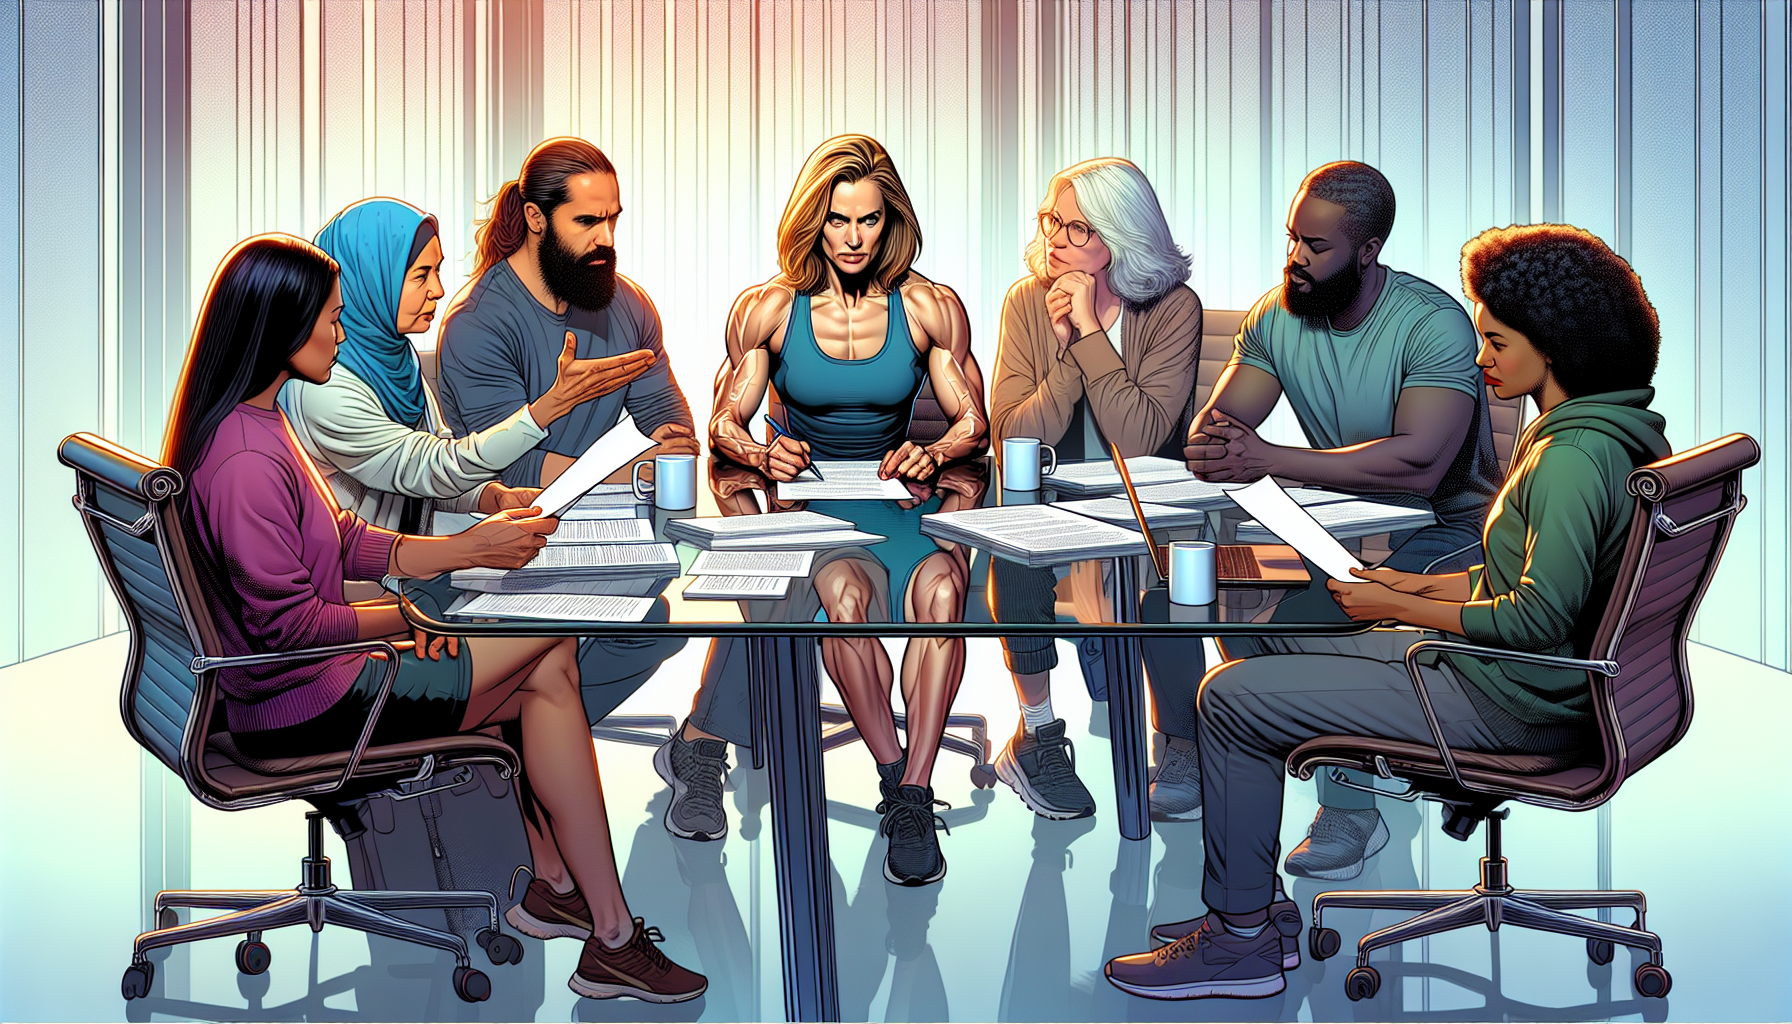 A close-up digital painting of a focused Ronda Rousey discussing script coverage with a diverse group of screenwriters around a modern, glass table filled with scripts, laptops, and coffee mugs in a c